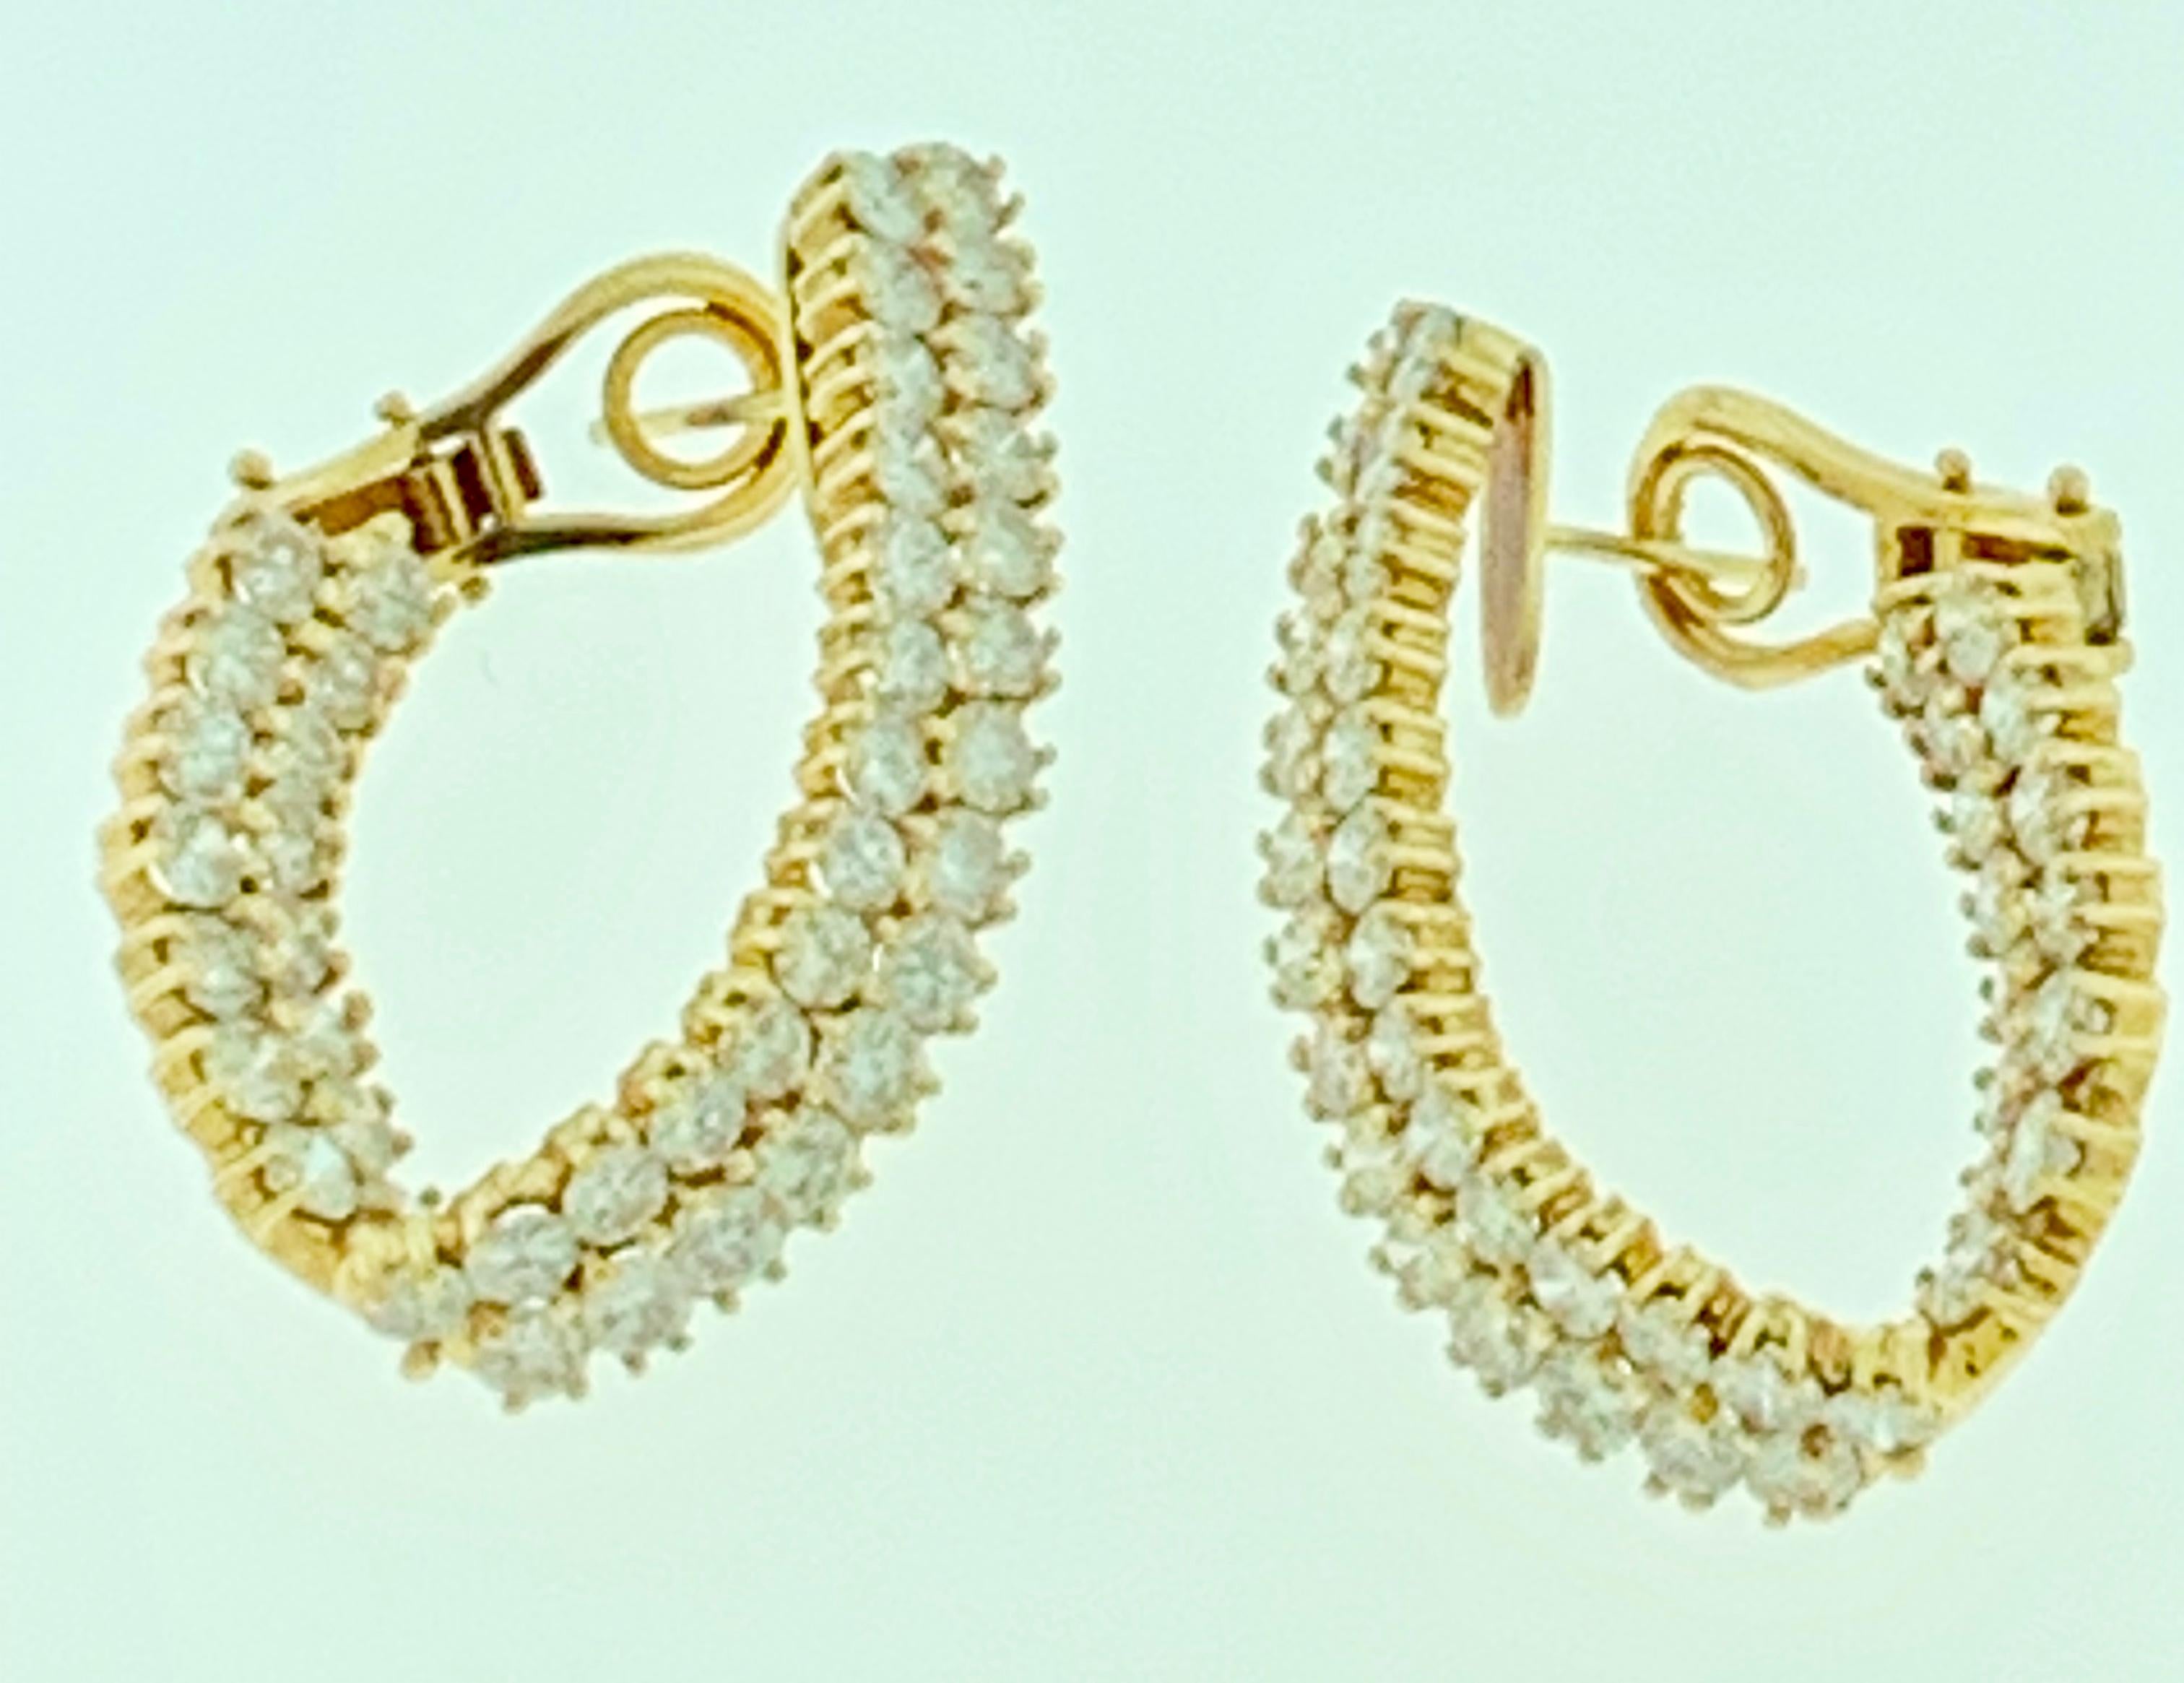 10 Ct Diamond VS Quality Hoop Earrings - Women In 18 kt Yellow gold 
Immaculately crafted from 18kt Yellow gold, these stunning Diamonds earrings are facing in front so you can see both front and back part of the e hoops 
It's a unique and playful